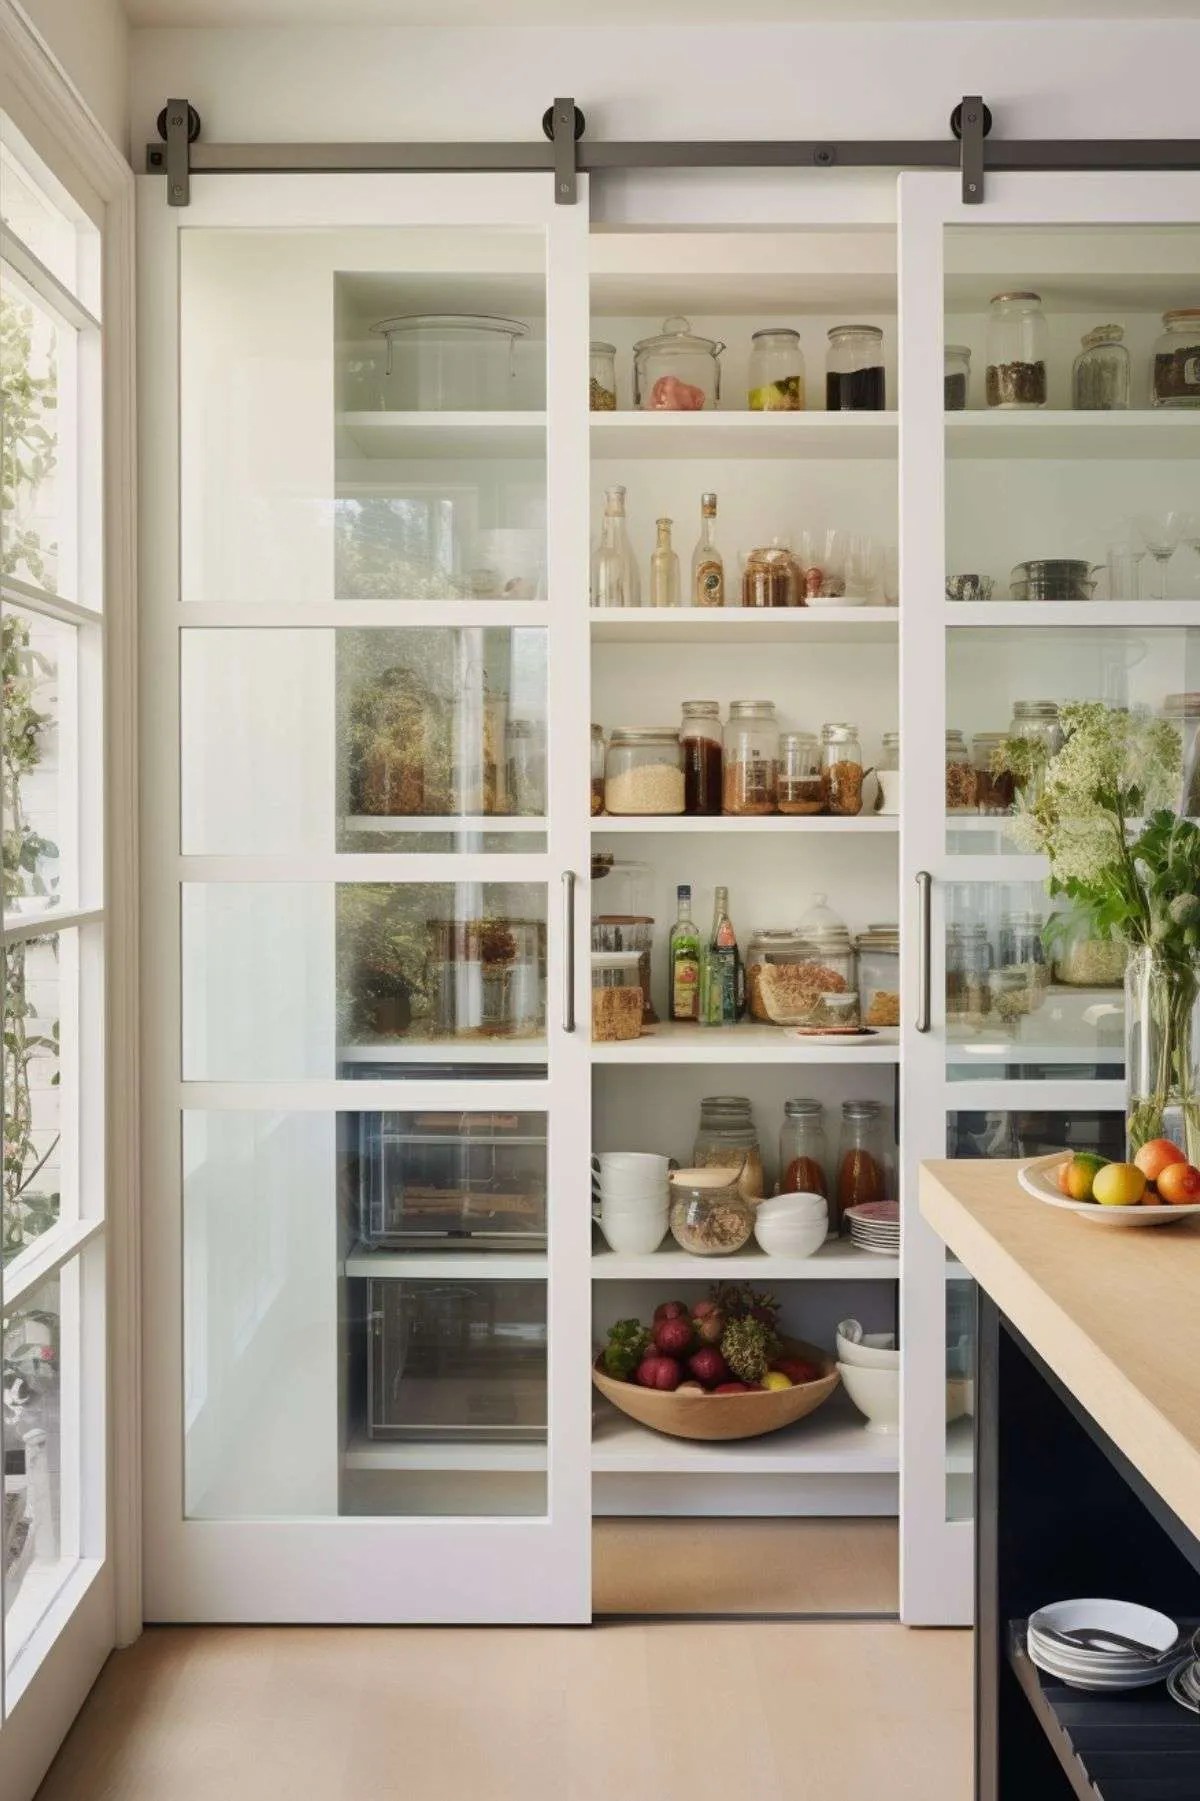 10 Pantry Ideas – How to Add Stylish Storage to your Kitchen